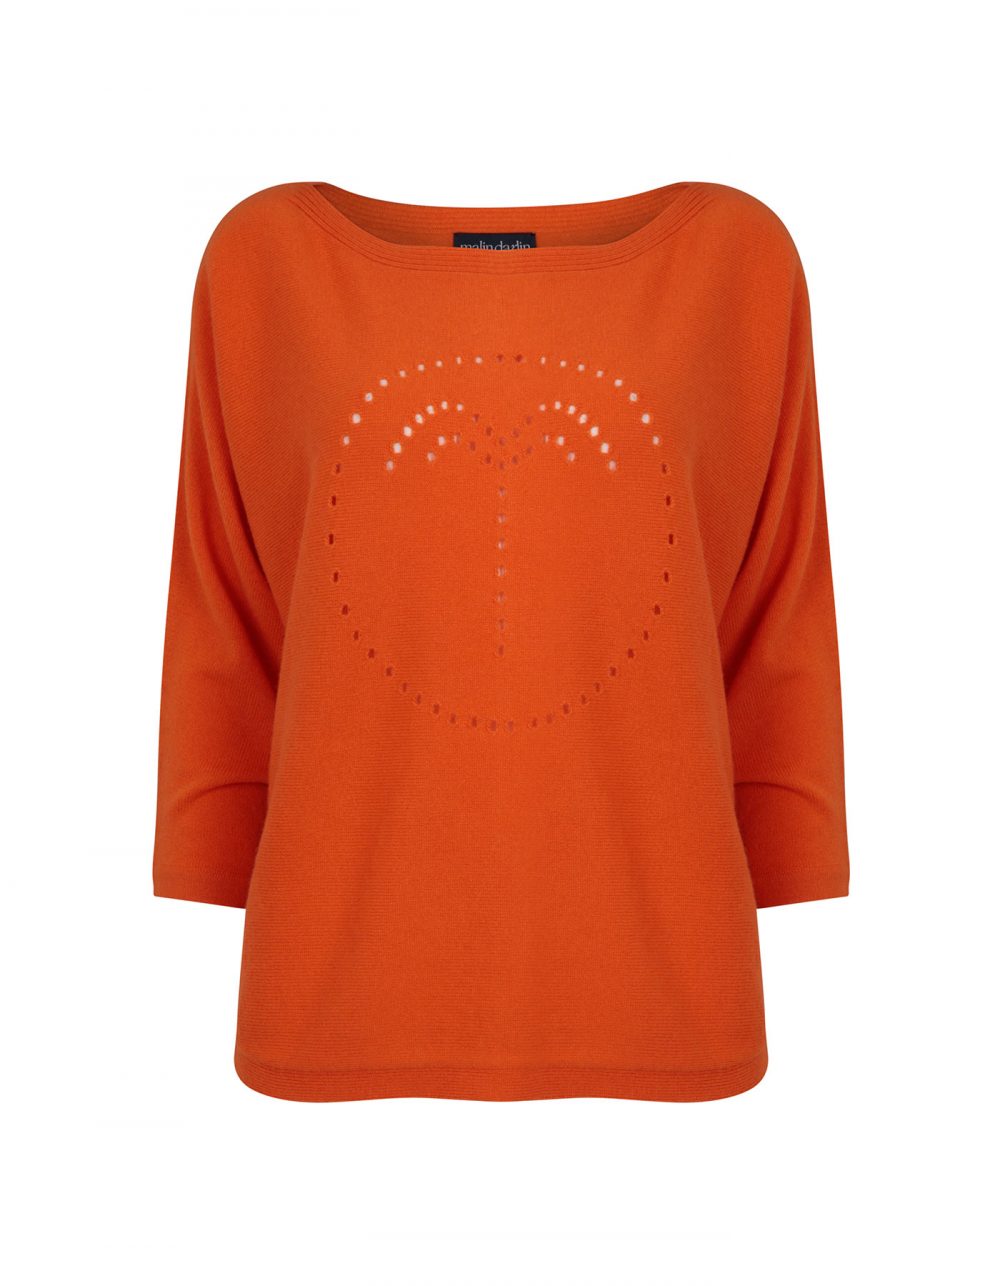 Photo of a palm jumper in orange, part of the malin darlin range of designer cashmere jumpers, on a white background.